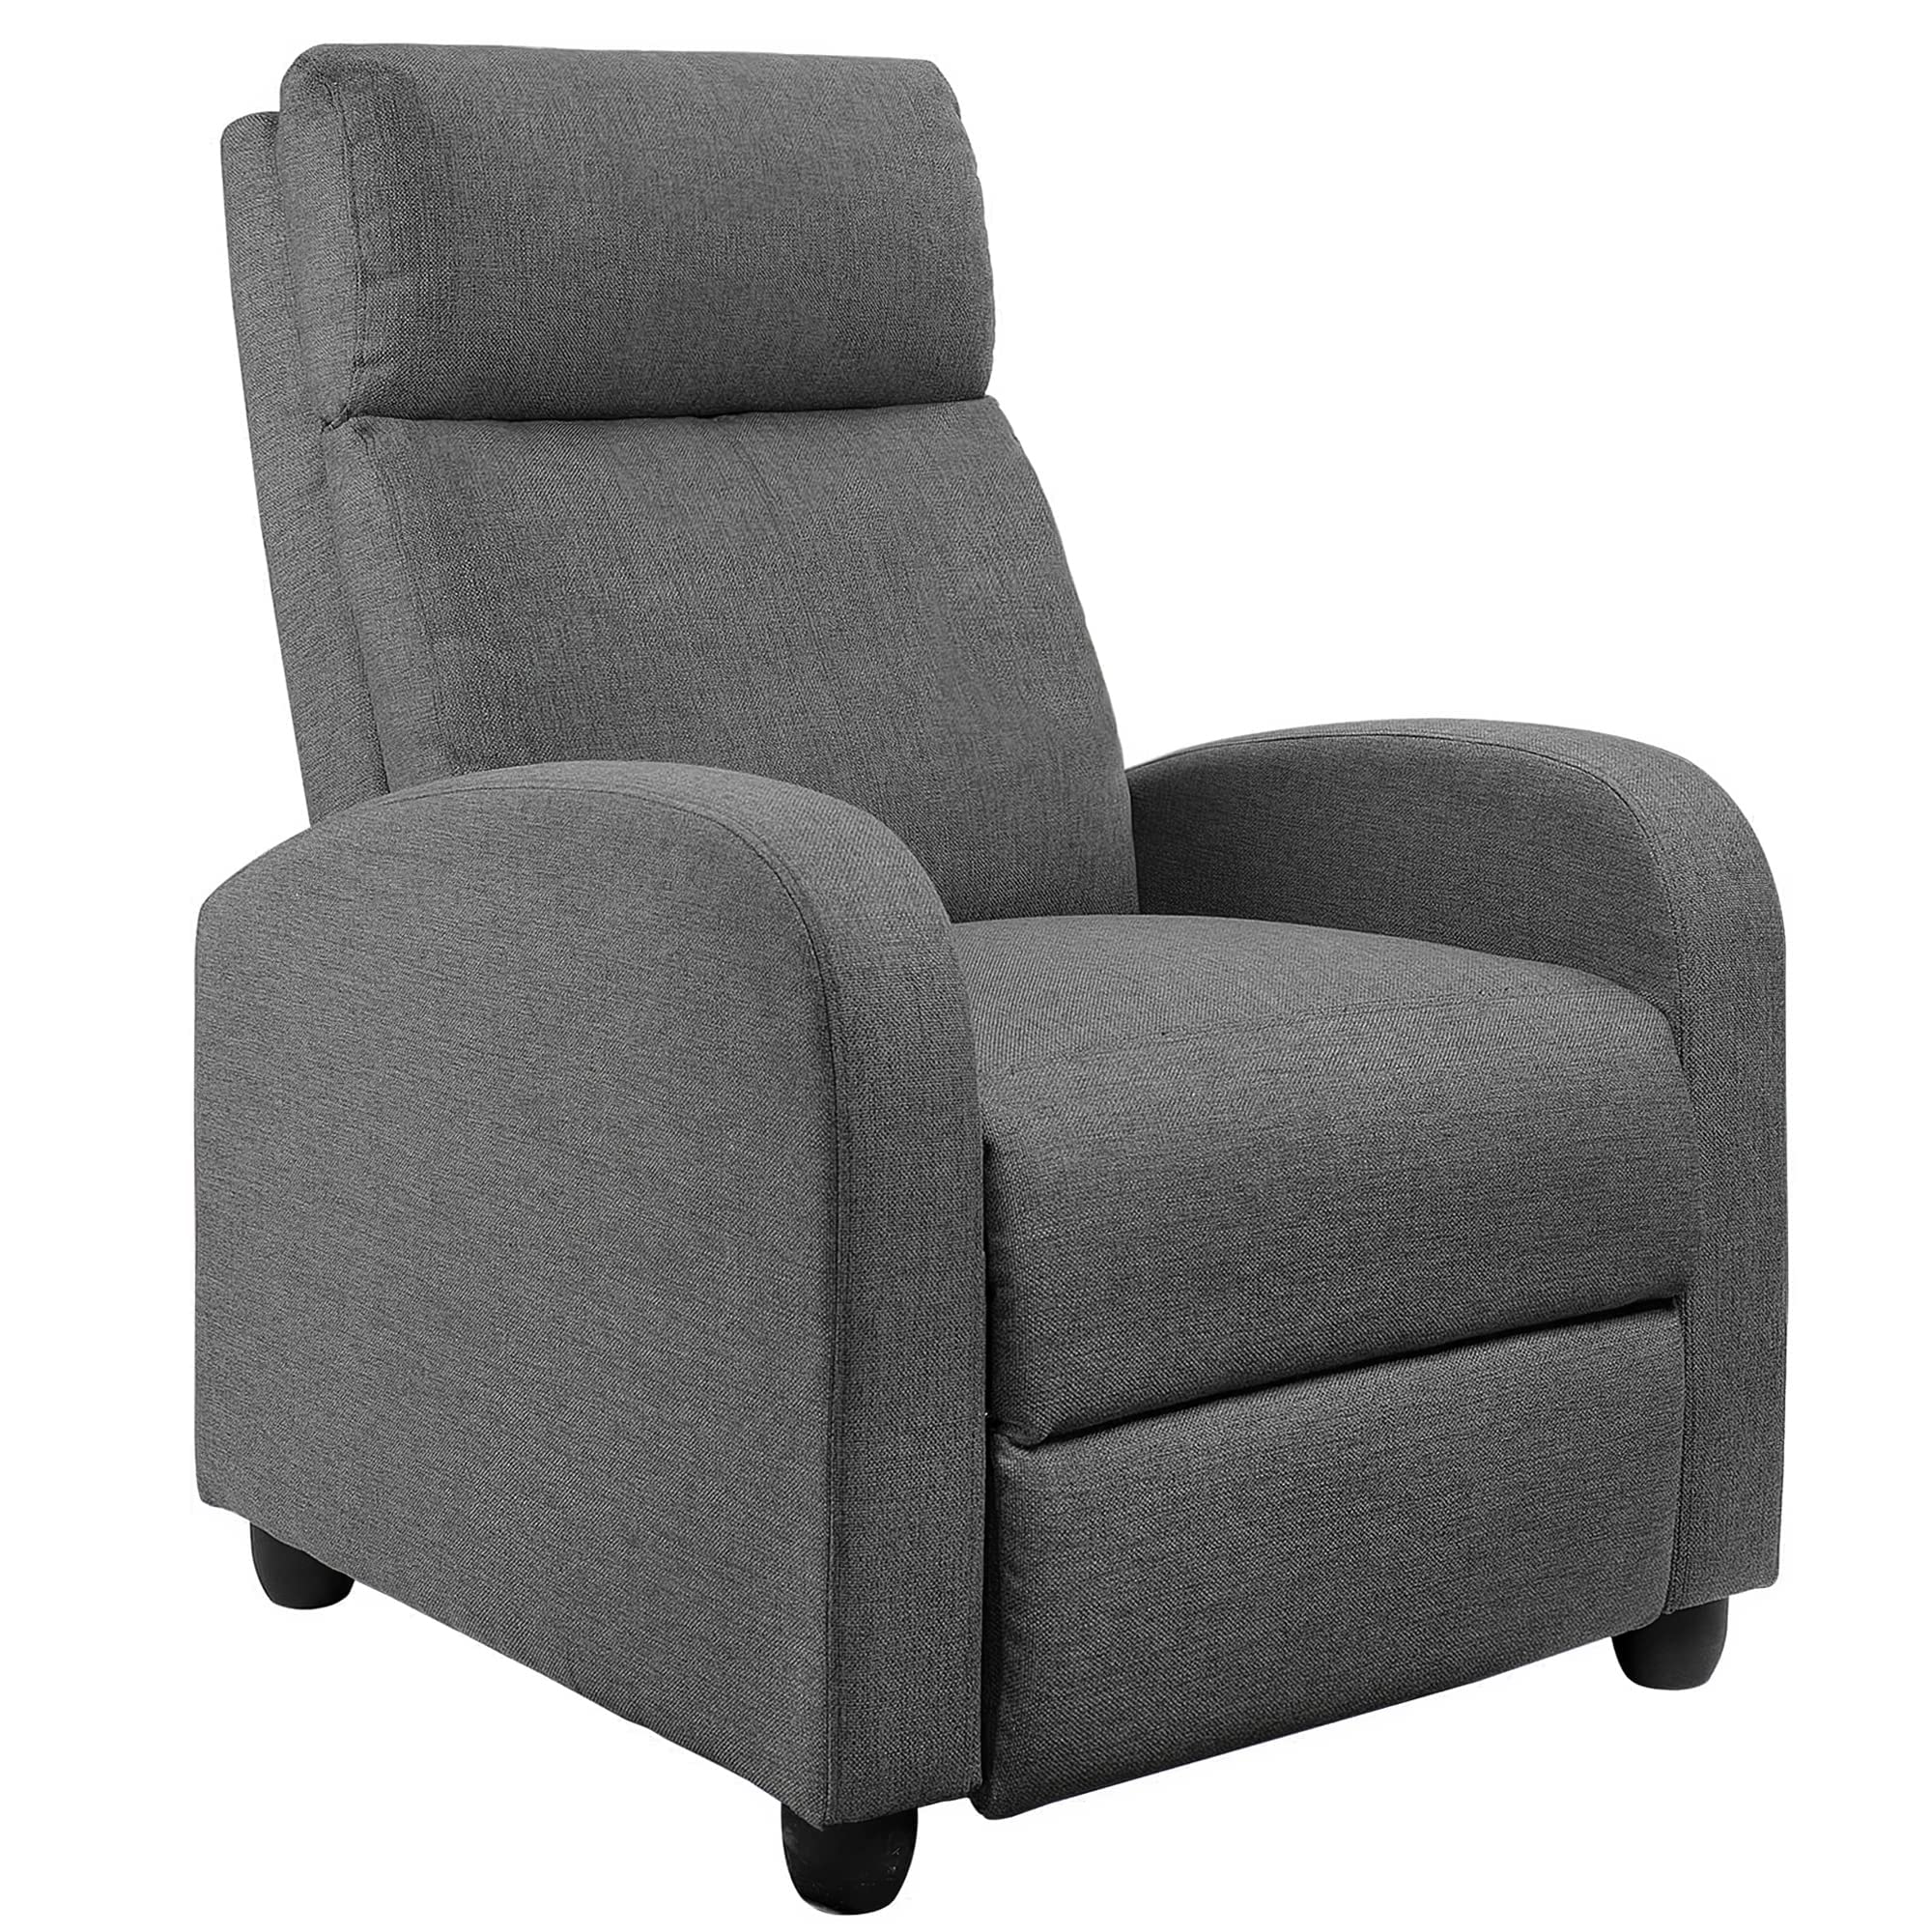 Comfort: Finding the Perfect Cheap Recliner for Your Home插图3